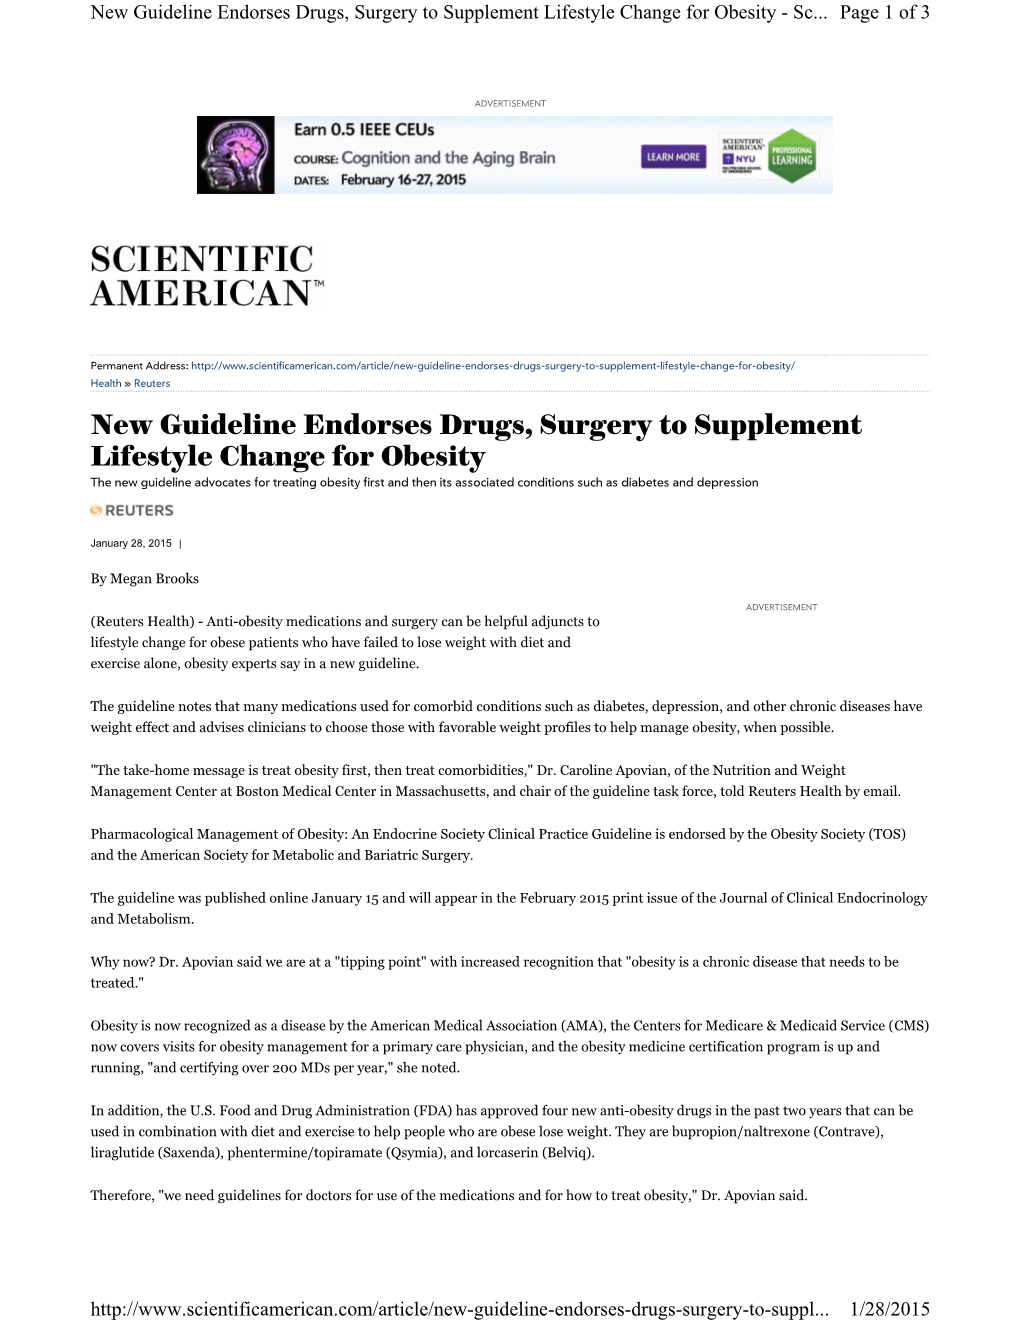 New Guideline Endorses Drugs, Surgery to Supplement Lifestyle Change for Obesity - Sc